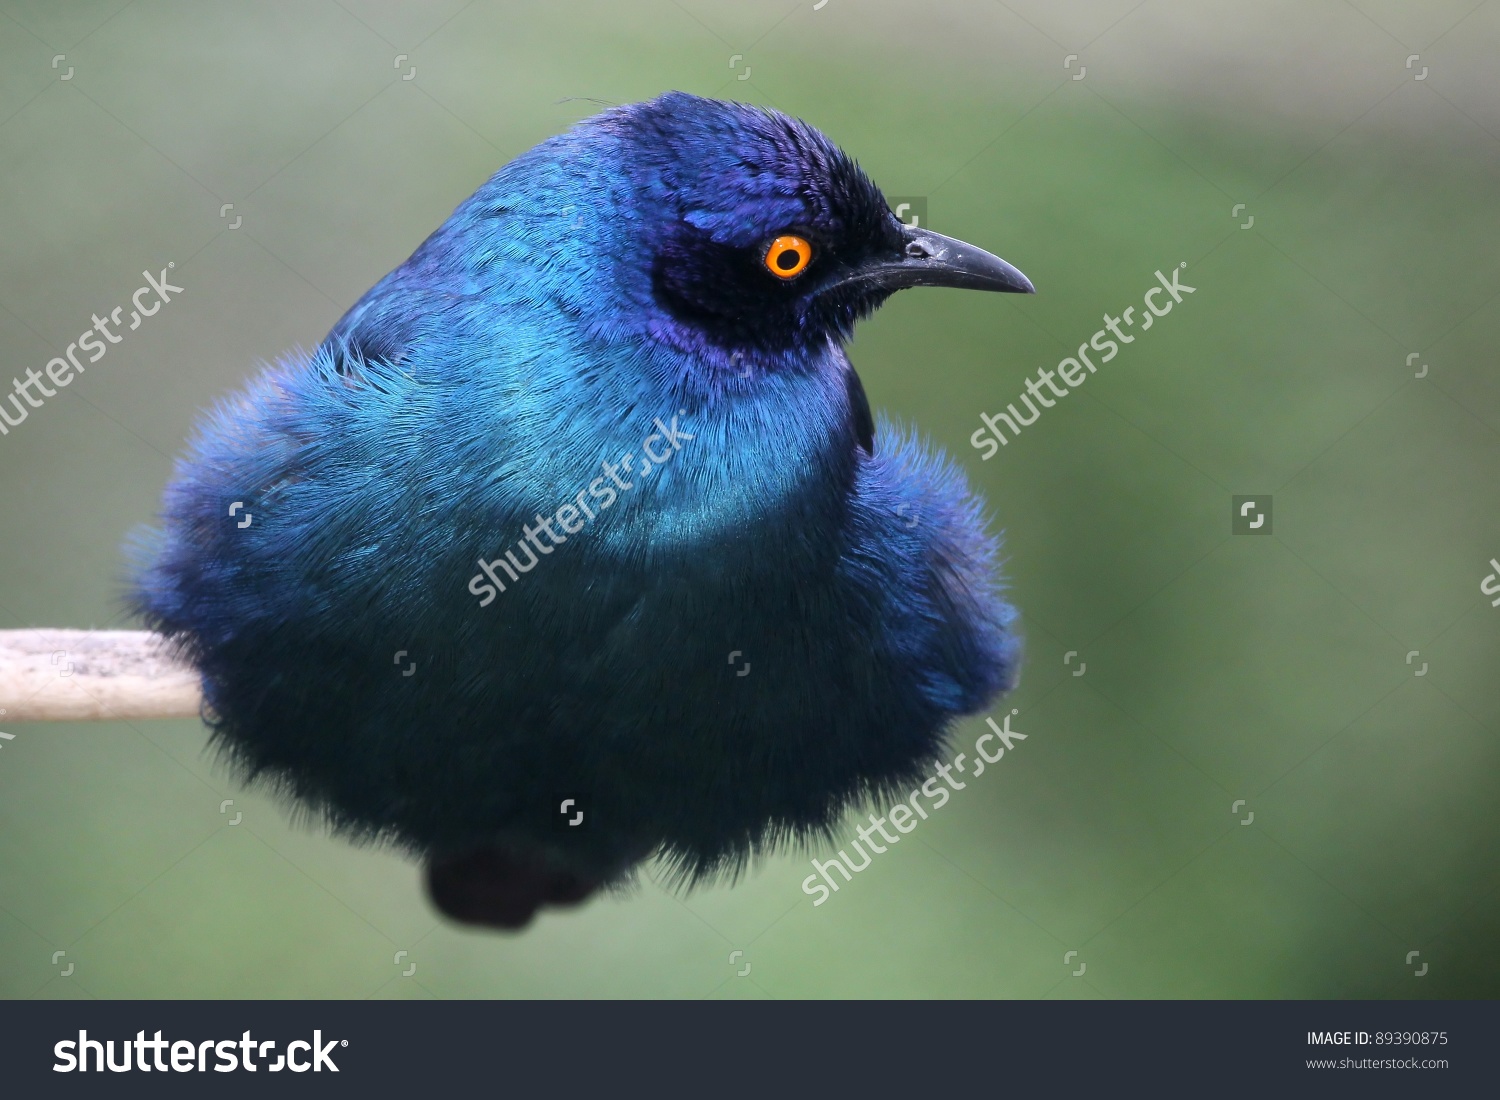 Long-tailed Glossy Starling clipart #6, Download drawings